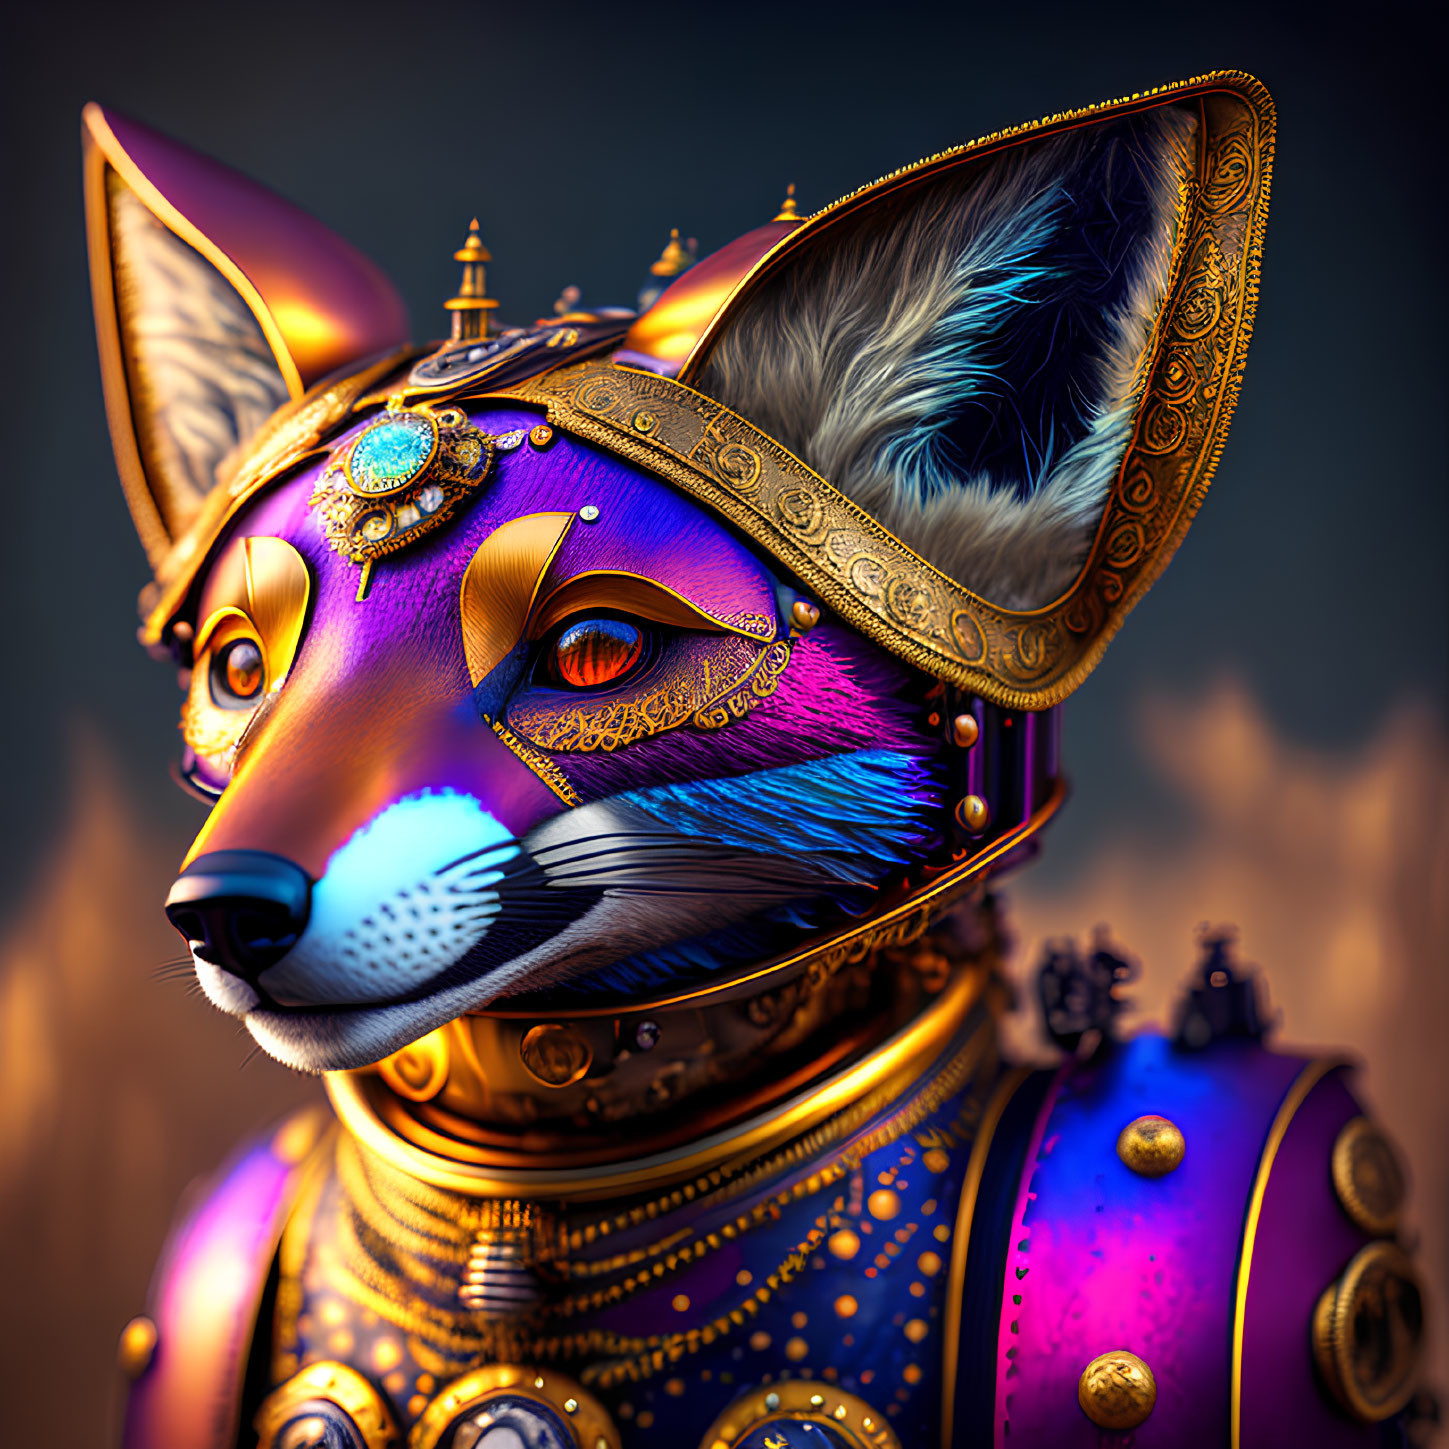 Anthropomorphic fox digital art in golden armor and jewels on blurred backdrop